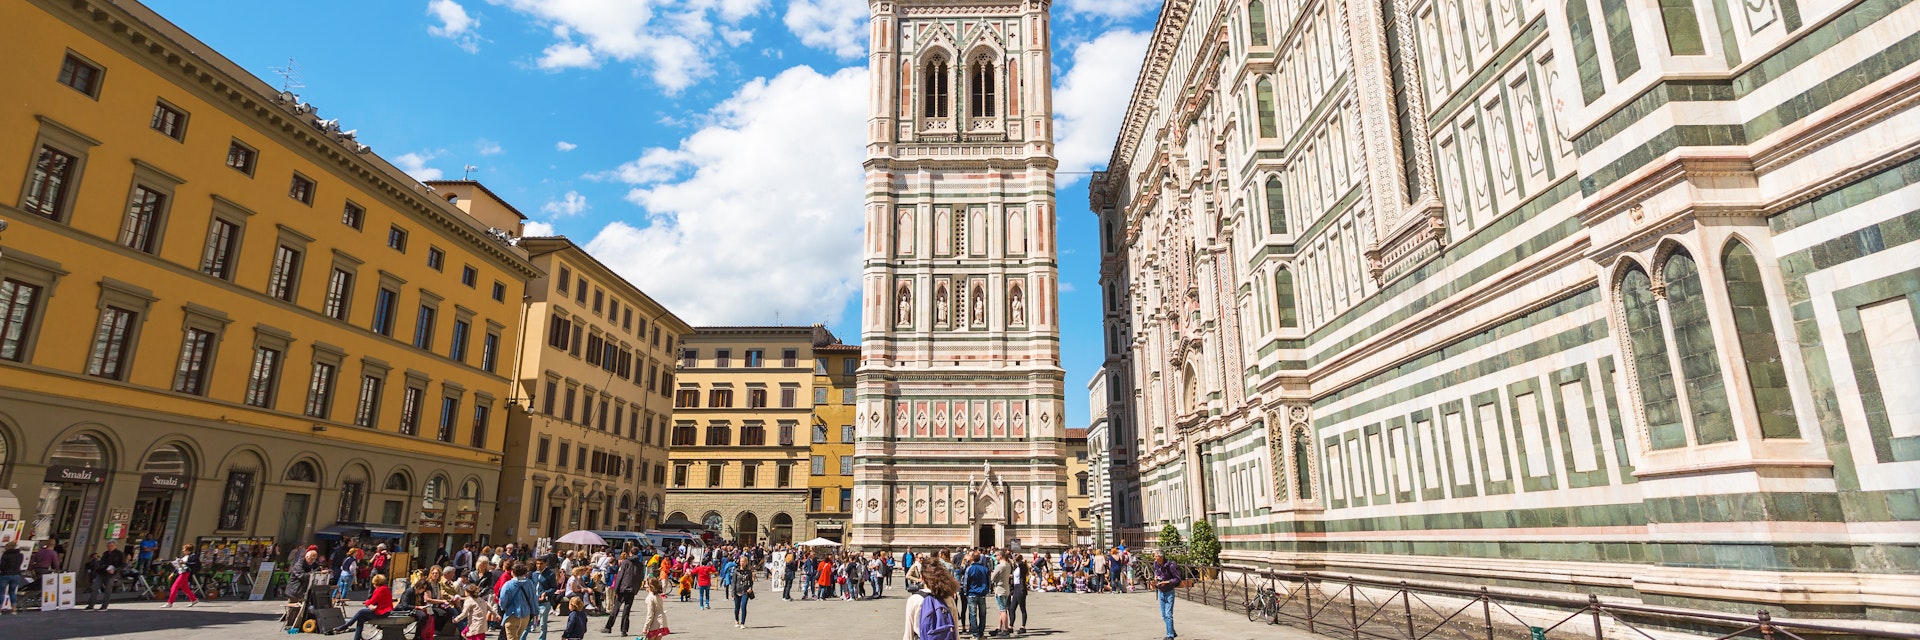 Giotto's bell tower at the Piazza del Duomo in Florence
658168180
piazza, cattedrale di santa maria del fiore, florence, landmark, heritage, historical, ornament, woman, giotto's bell tower